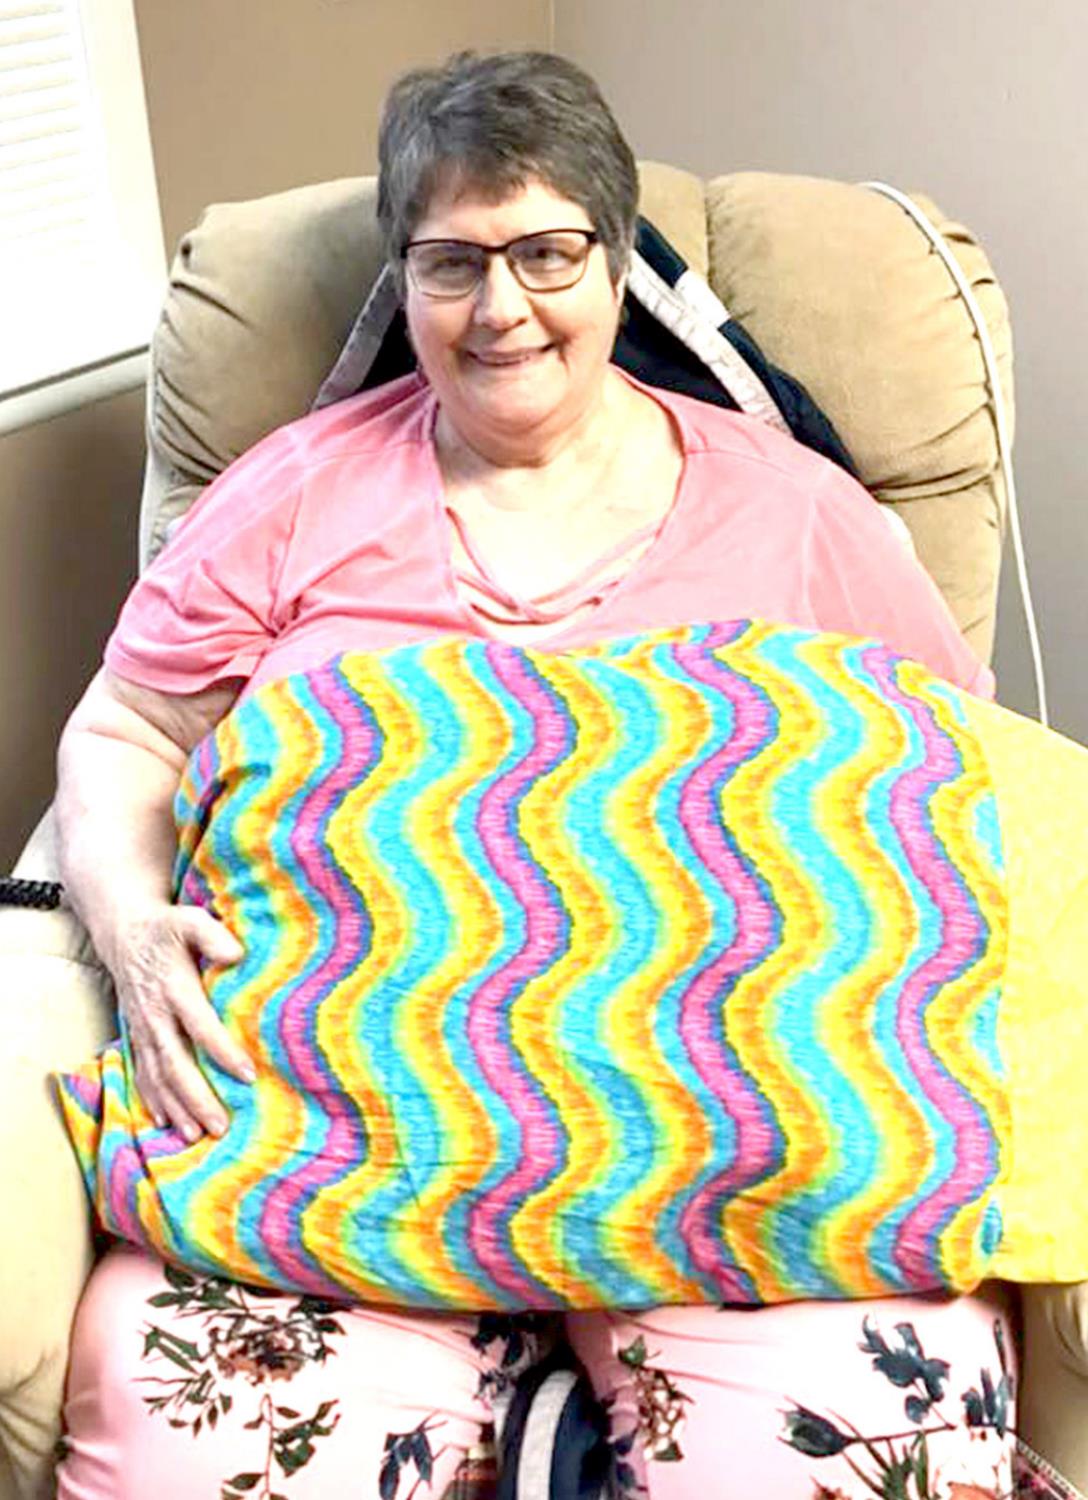 SUNSHINE IN A PILLOWCASE is what the St. Thomas Mission Quilters delivered to residents of Solomon Valley Manor such as the one held by resident Judy Thompson.